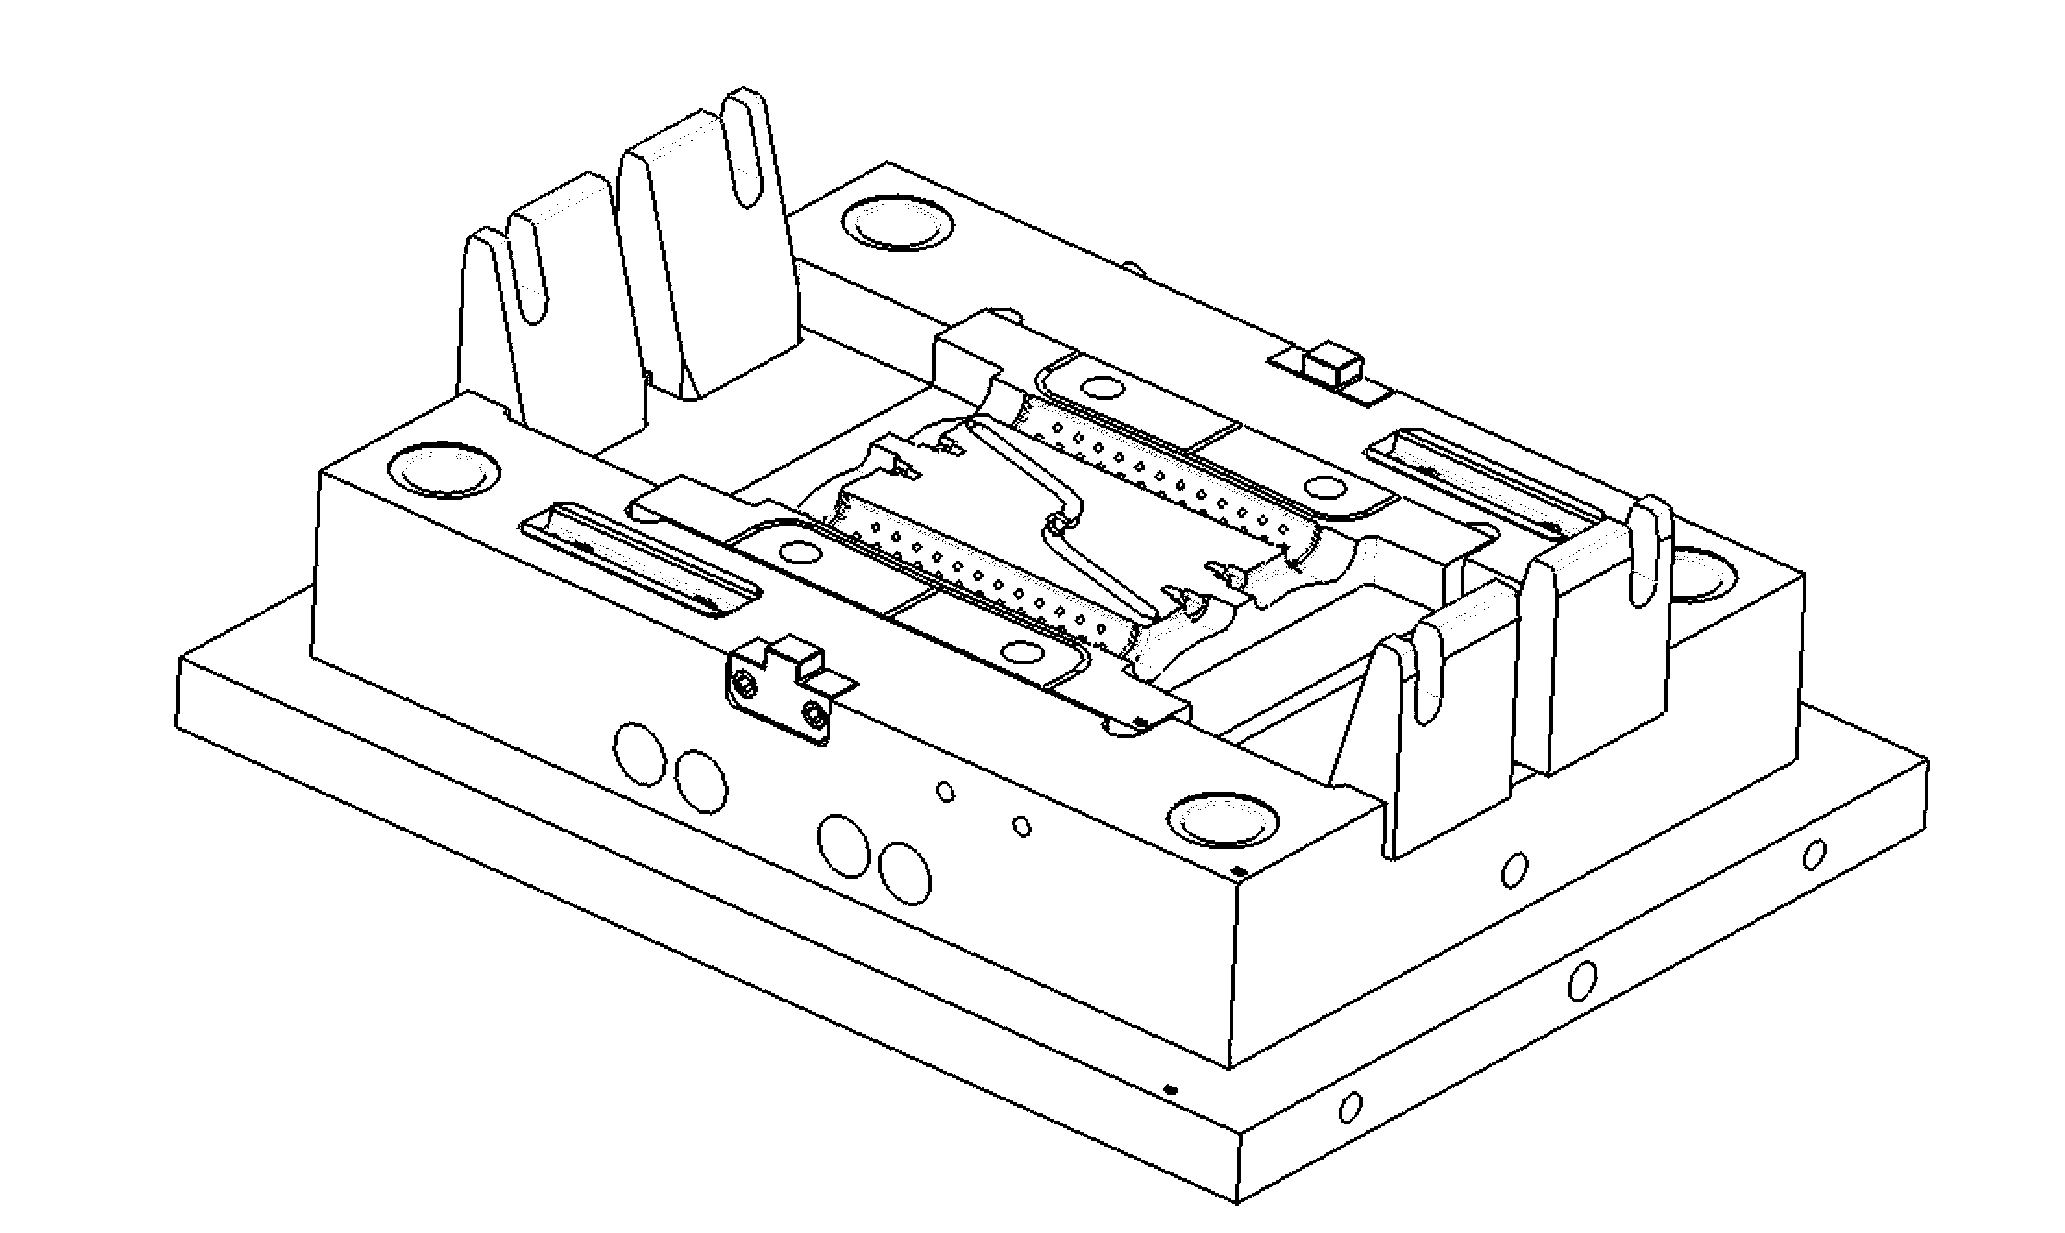 Deformation reducing and uniformly cooling injection mold for long and thin handles and production process